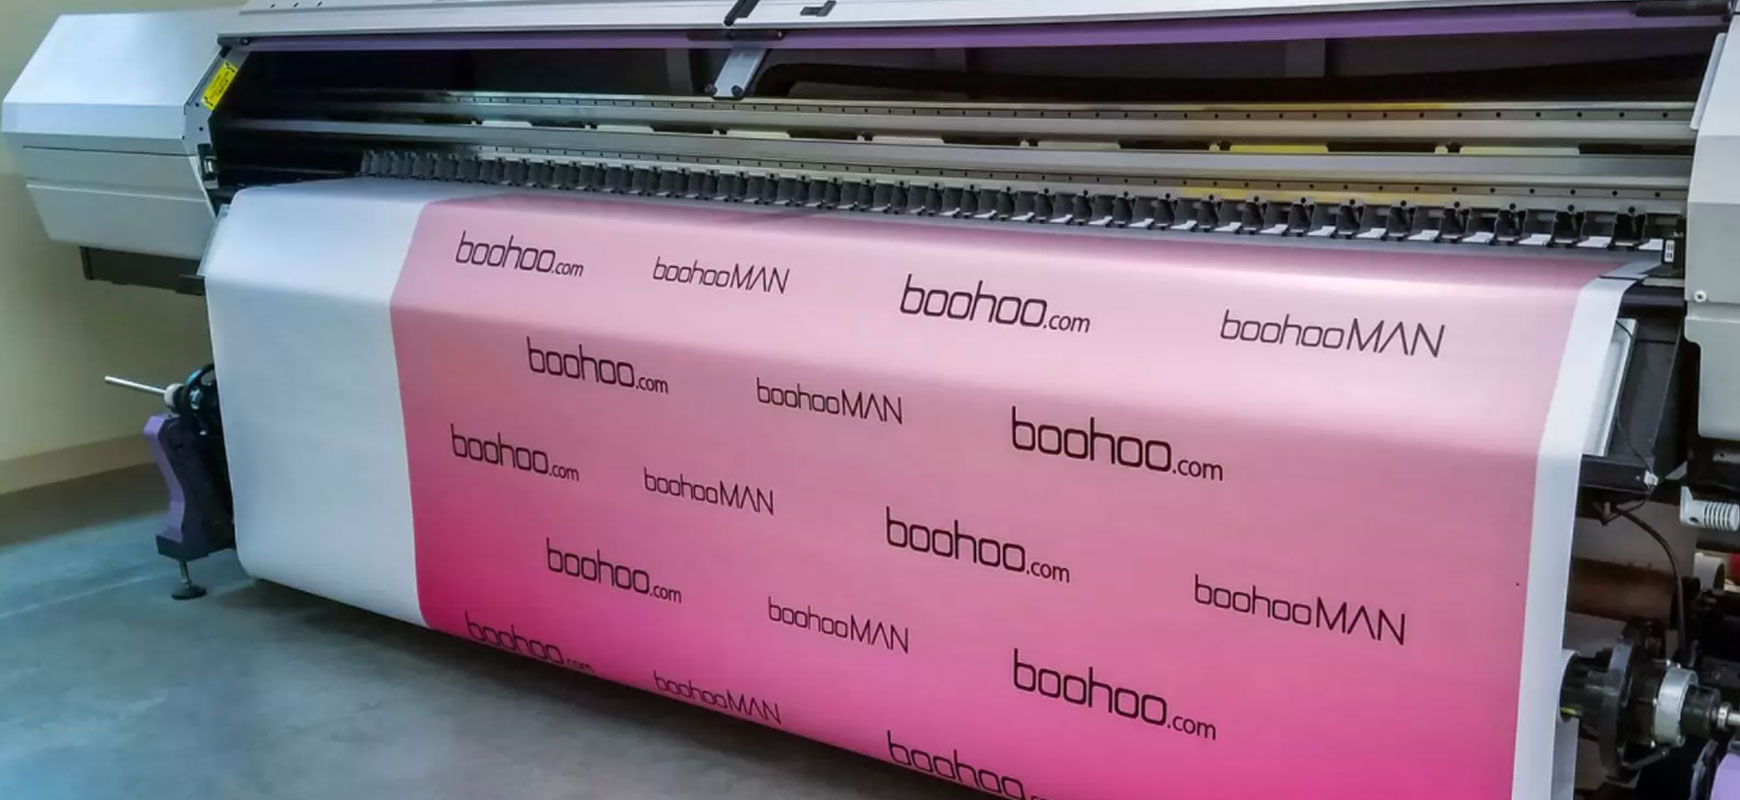 Boohoo trade show banner display in pink made of vinyl